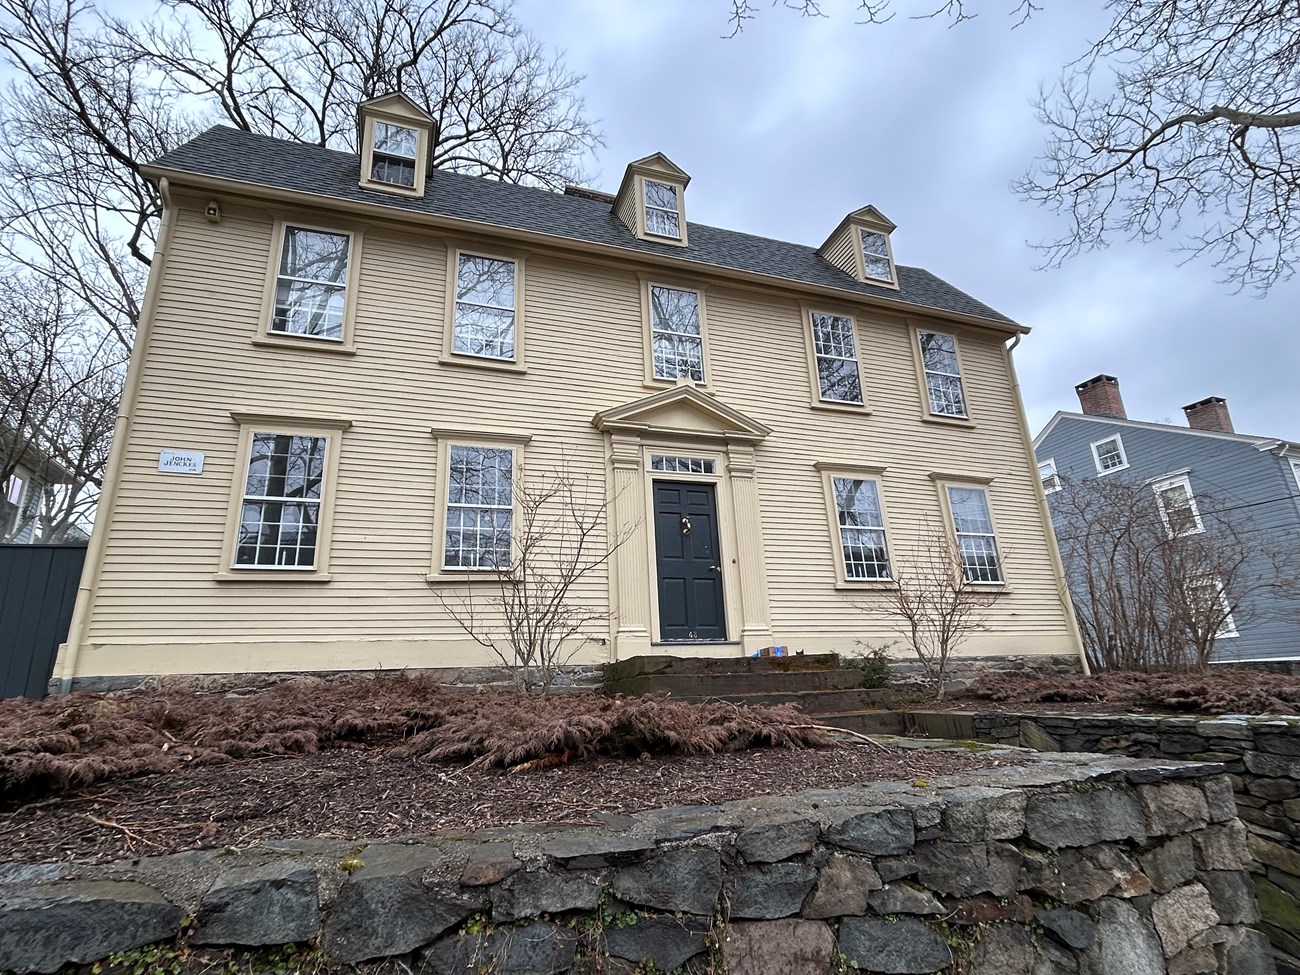 Yellow 2 story colonial house